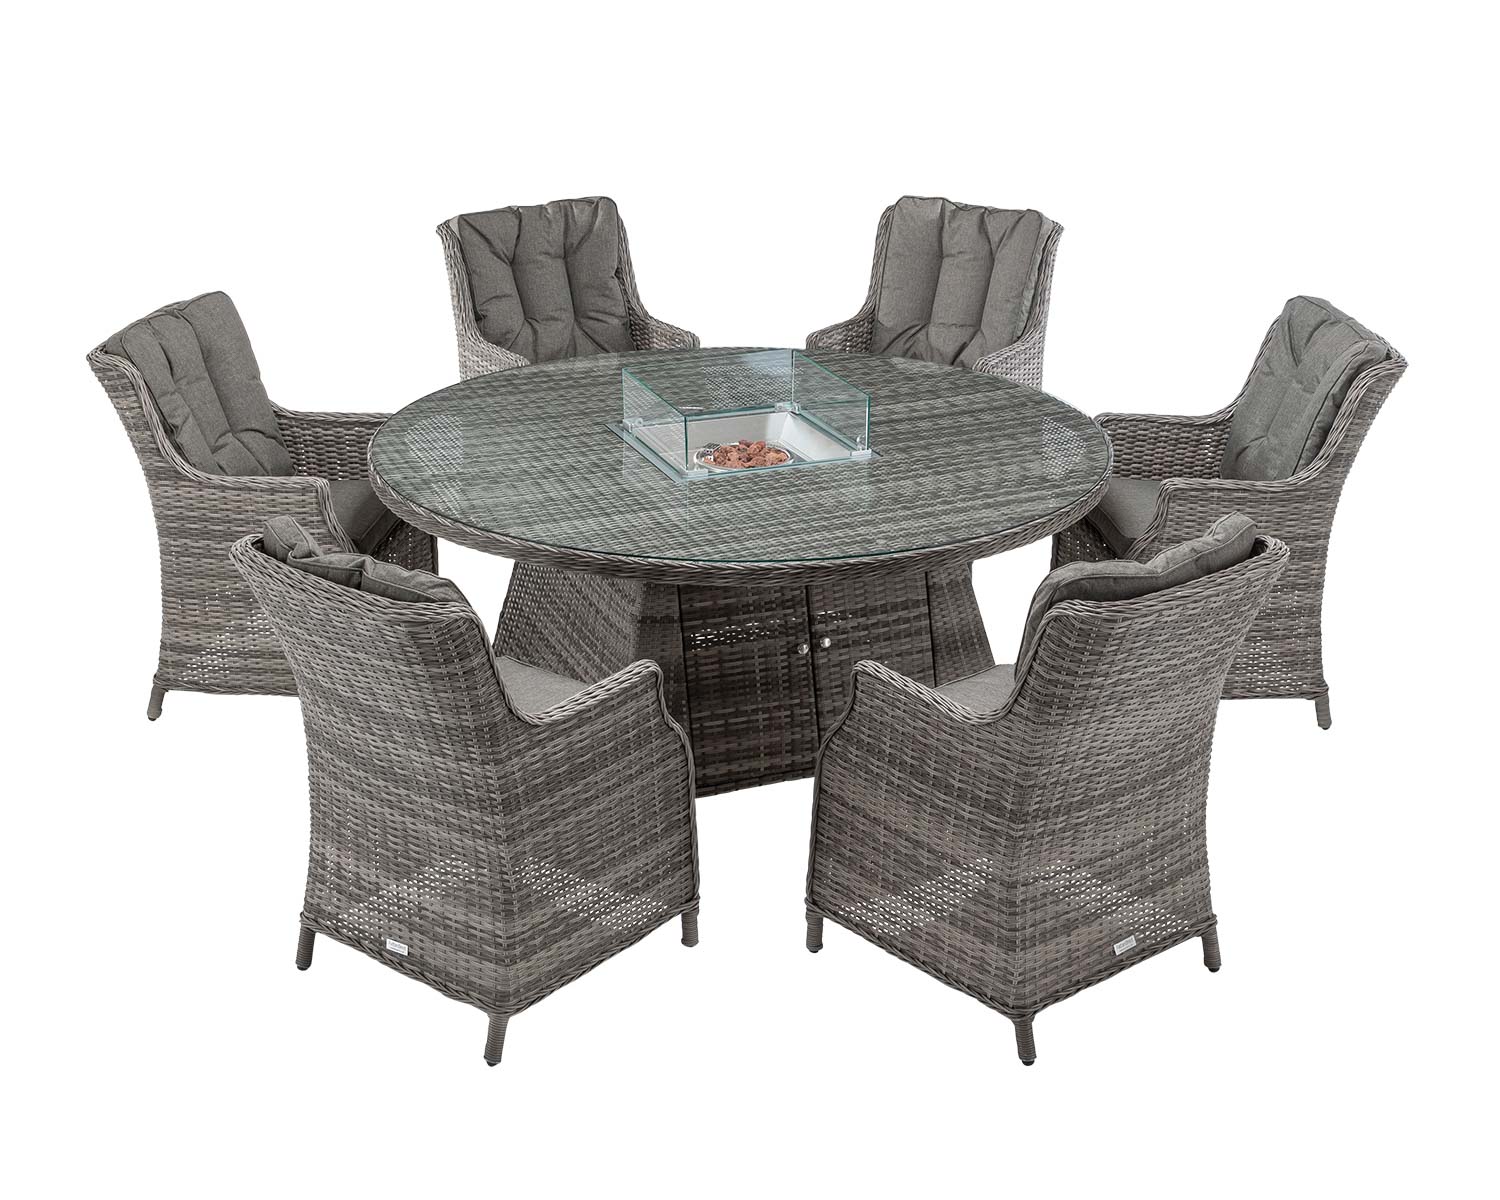 Riviera 6 Rattan Garden Chairs Amp Large Round Fire Pit Dining Table In Grey Riviera